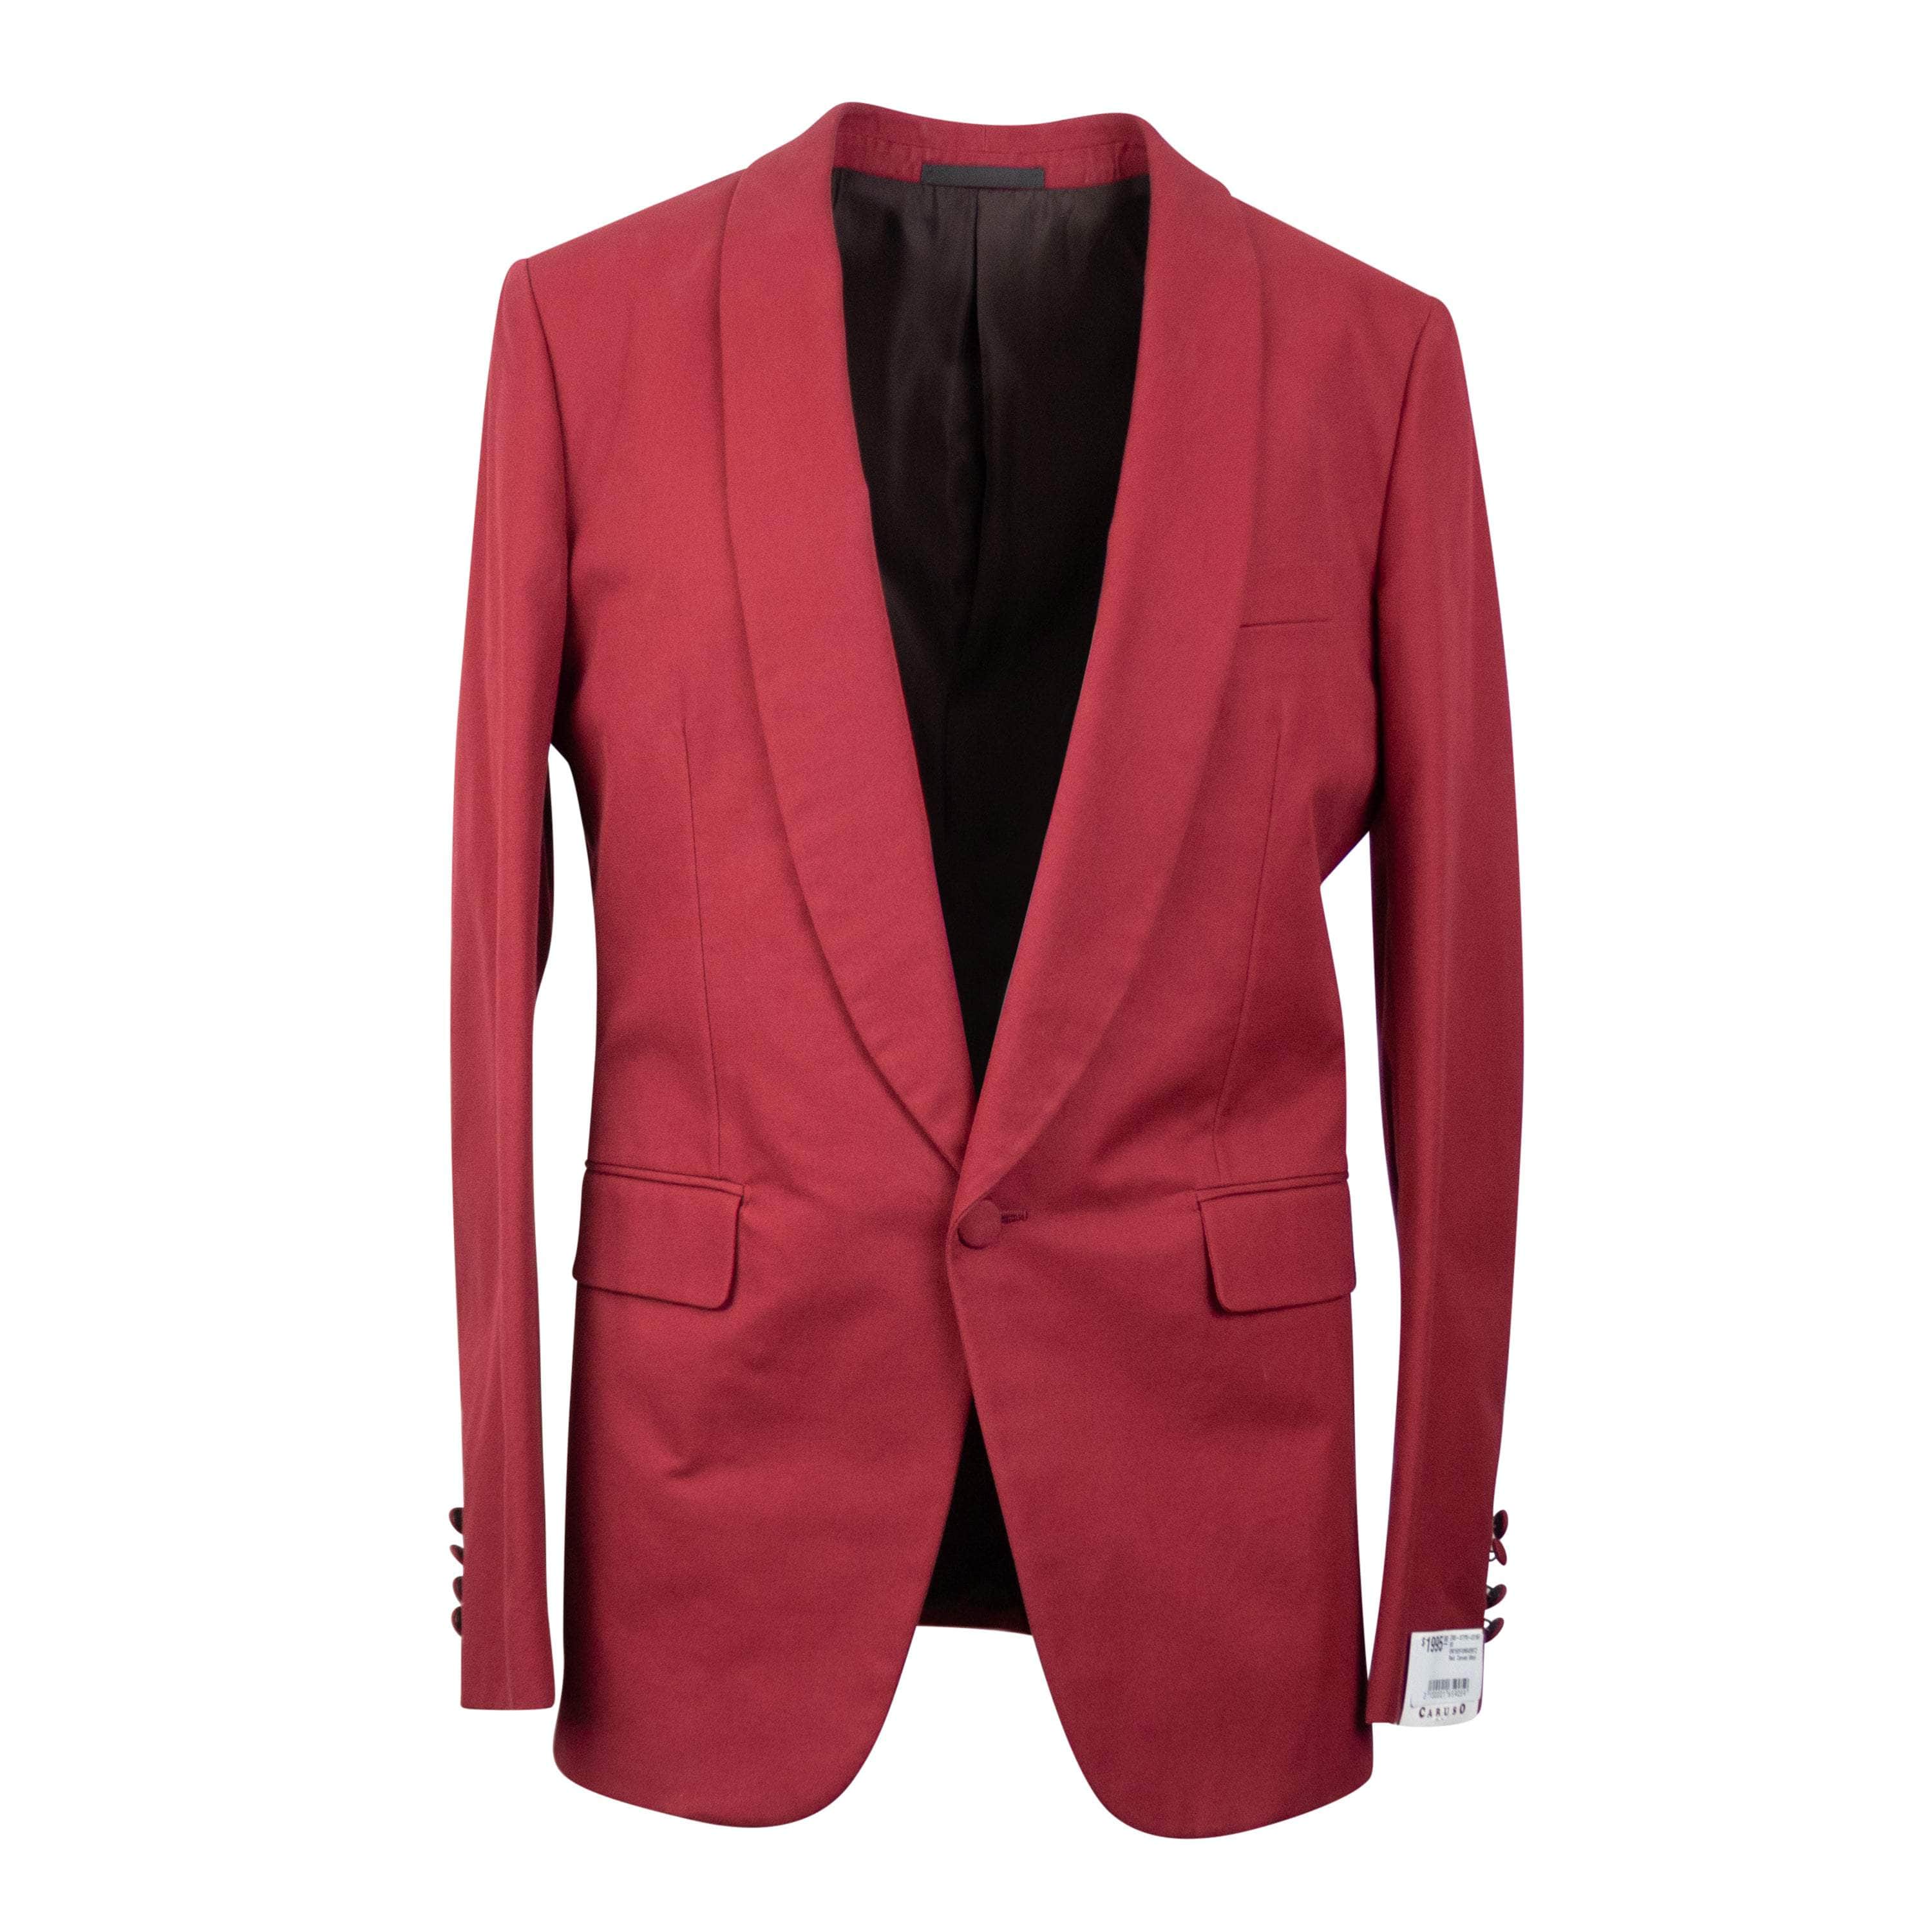 Caruso 500-750, caruso, channelenable-all, chicmi, couponcollection, main-clothing, shop375, size-50, Stadium Goods, stadiumgoods 50 Red Caruso Wool Single Breasted Suit 10R CRS-XTPS-0116/50 CRS-XTPS-0116/50